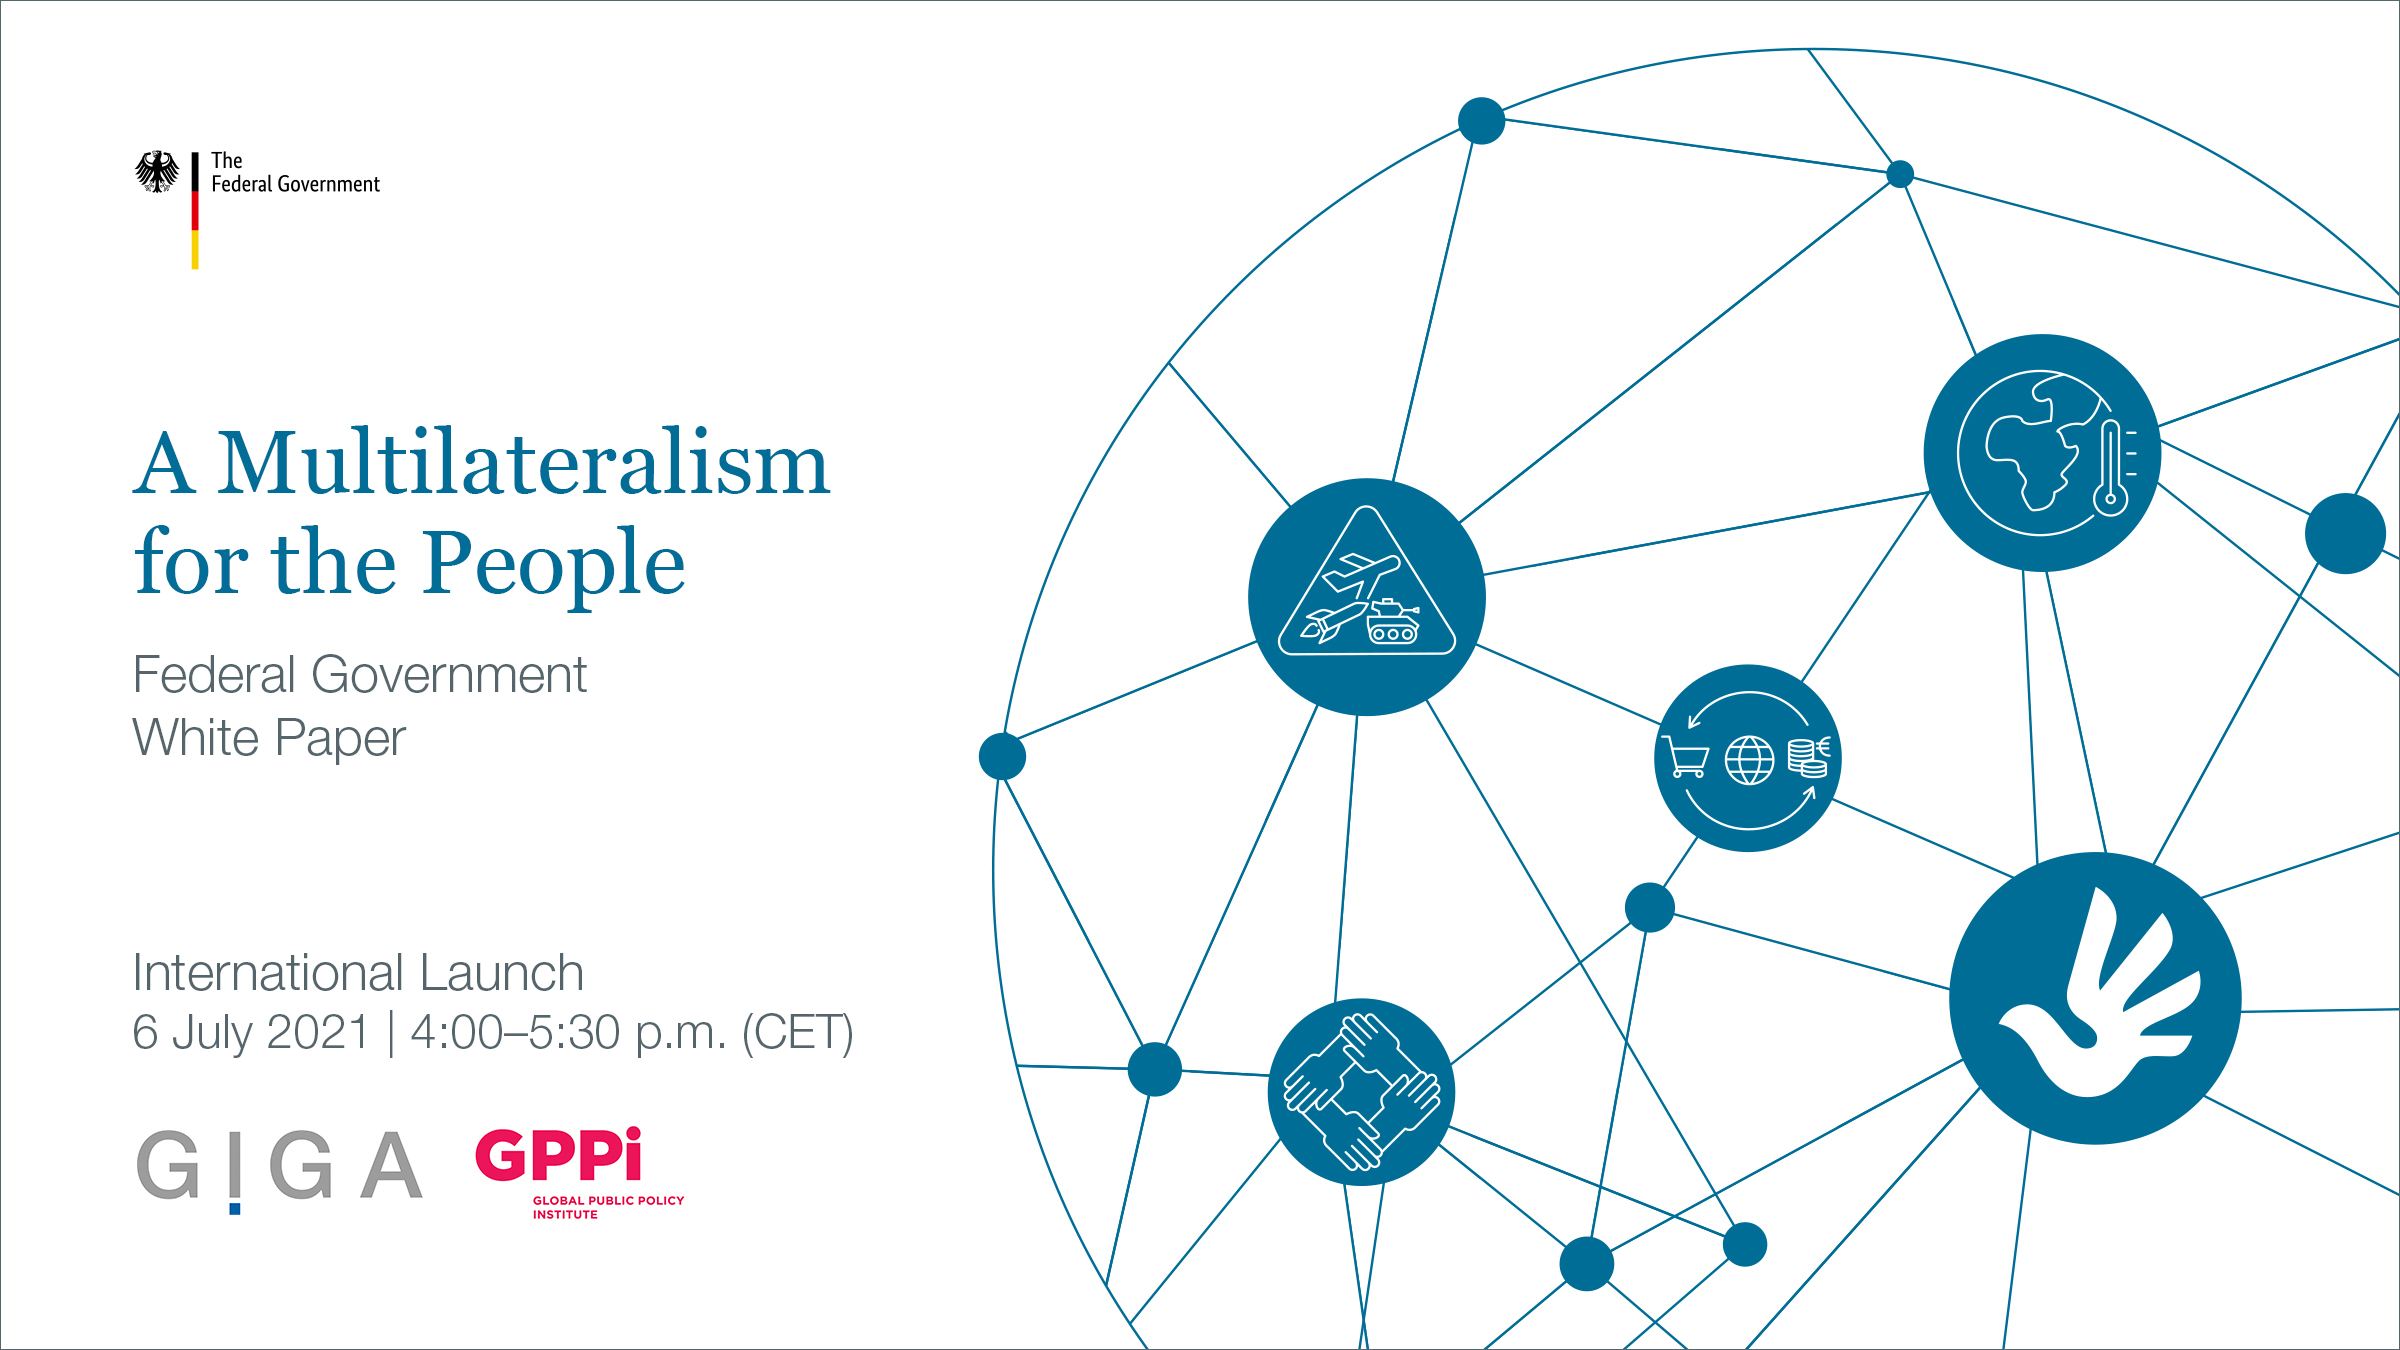 “A Multilateralism for the People”: International Launch of Germany’s White Paper on Multilateralism